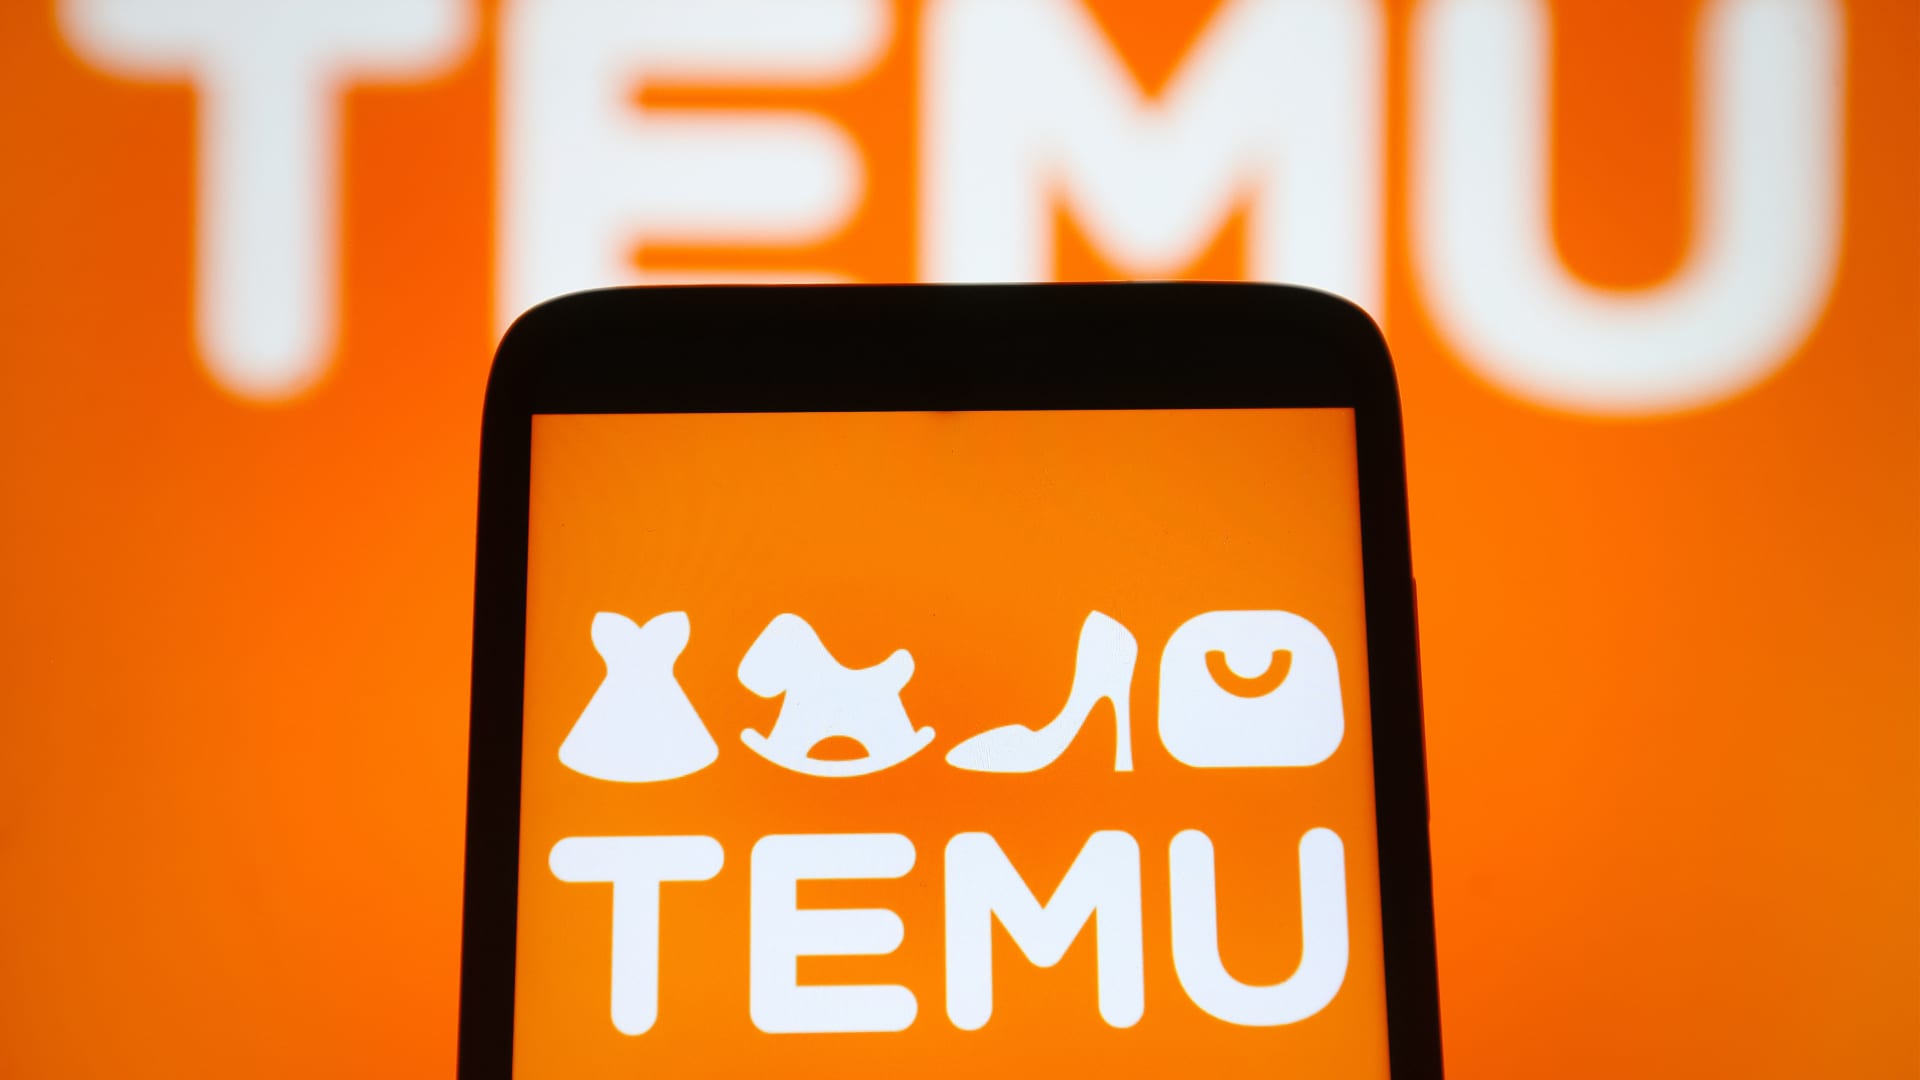 China e-commerce player Temu is about to run its second Super Bowl ad — and do $10 million in giveaways